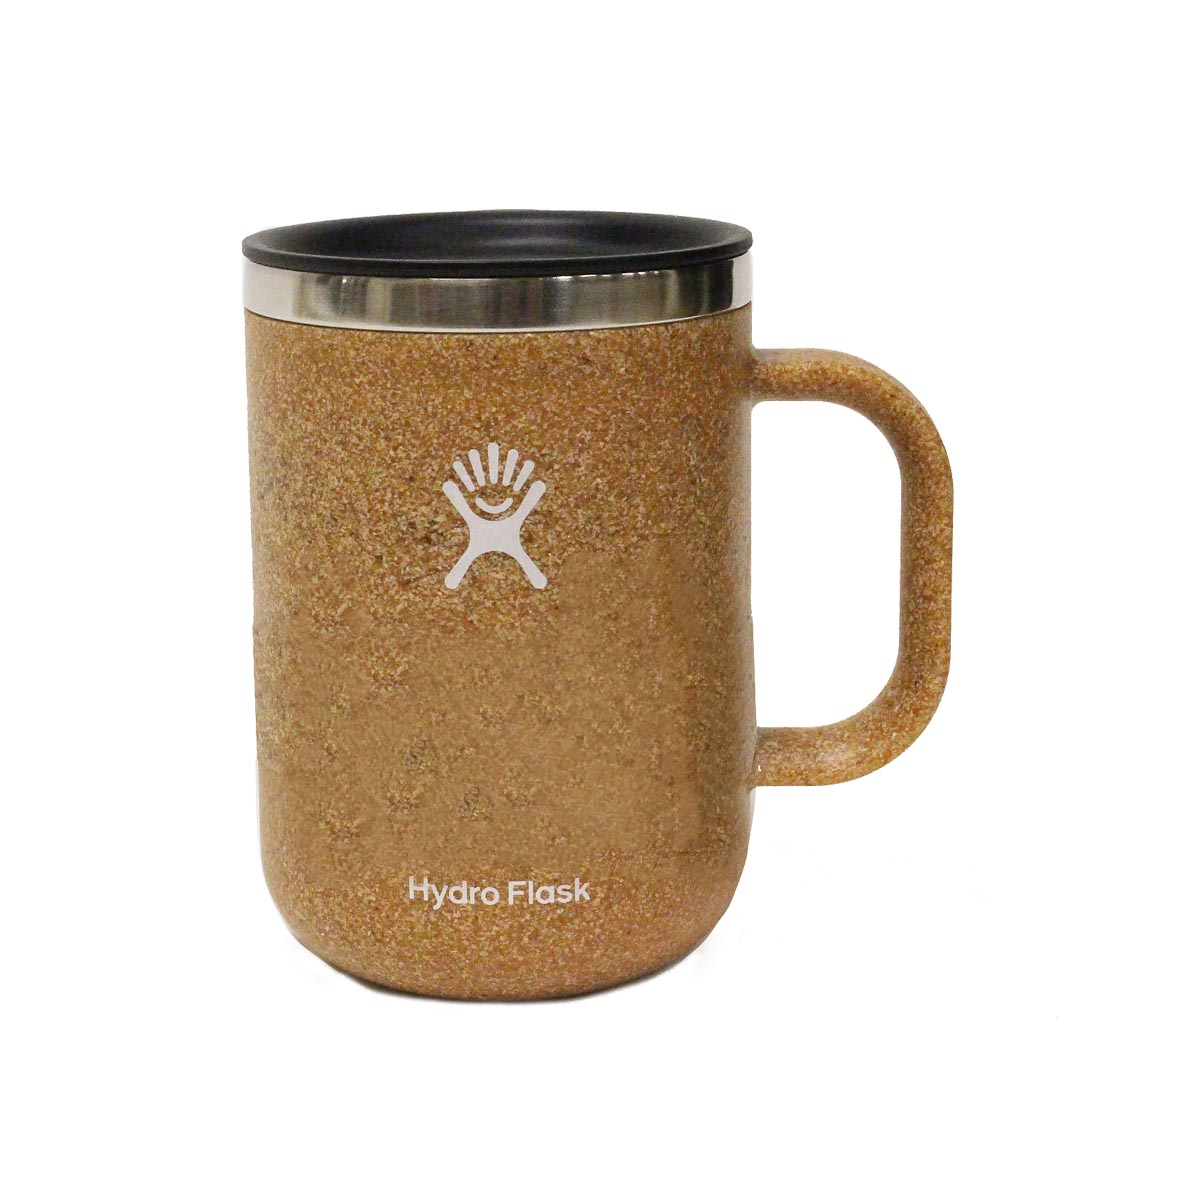 http://www.getzs.com/images/products/107761/full_hydroflask_24oz_bark.jpg